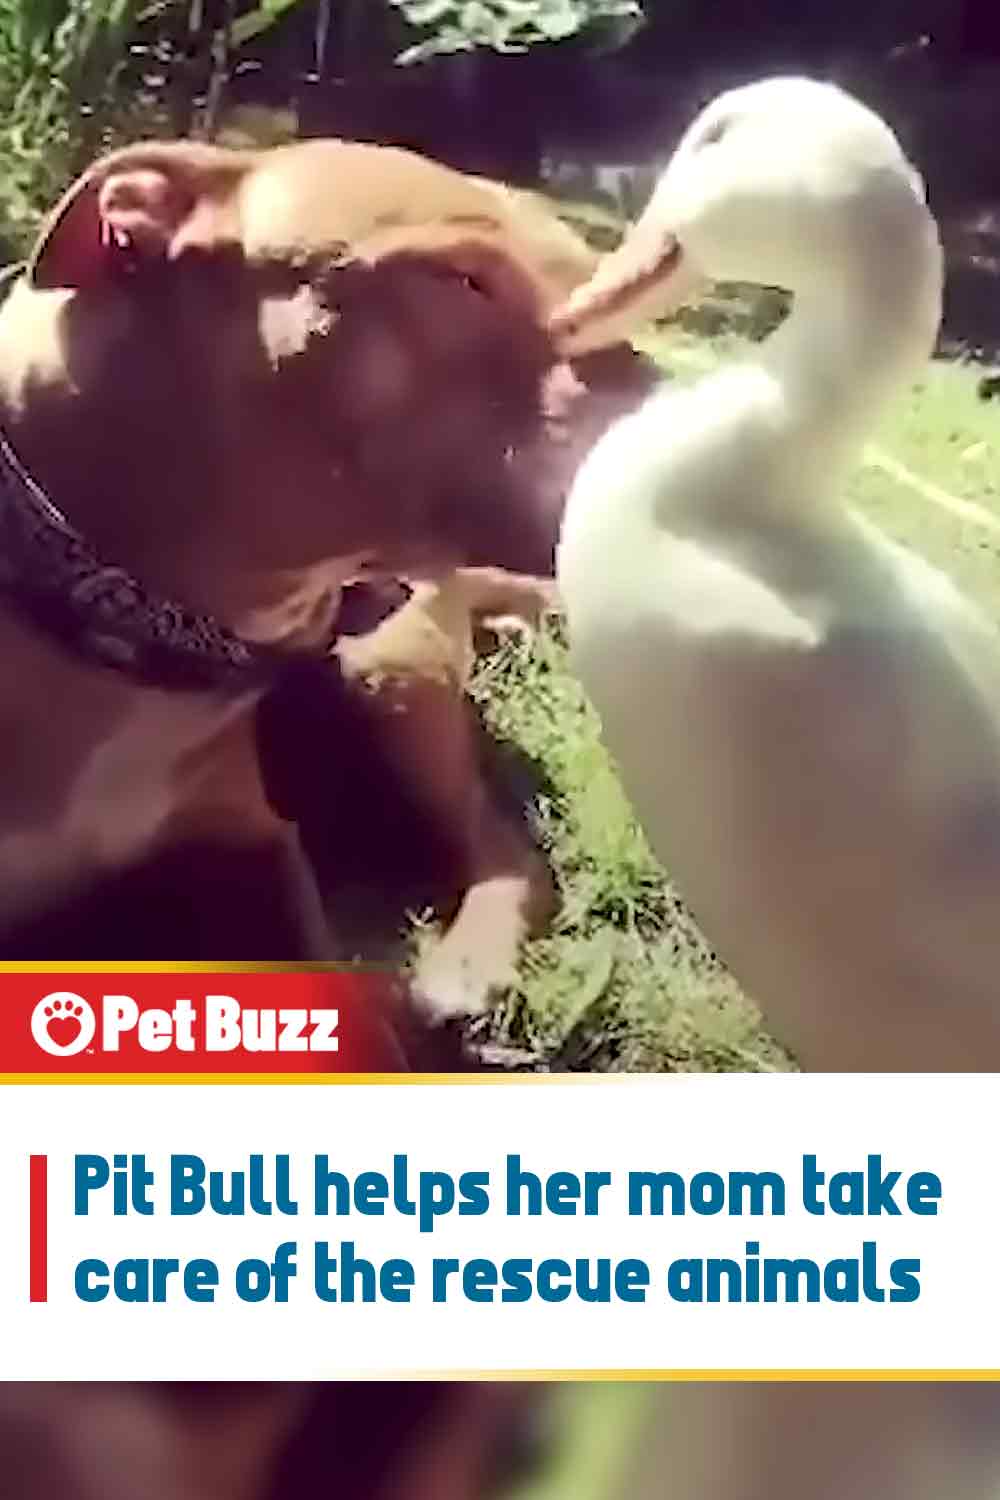 Pit Bull helps her mom take care of the rescue animals